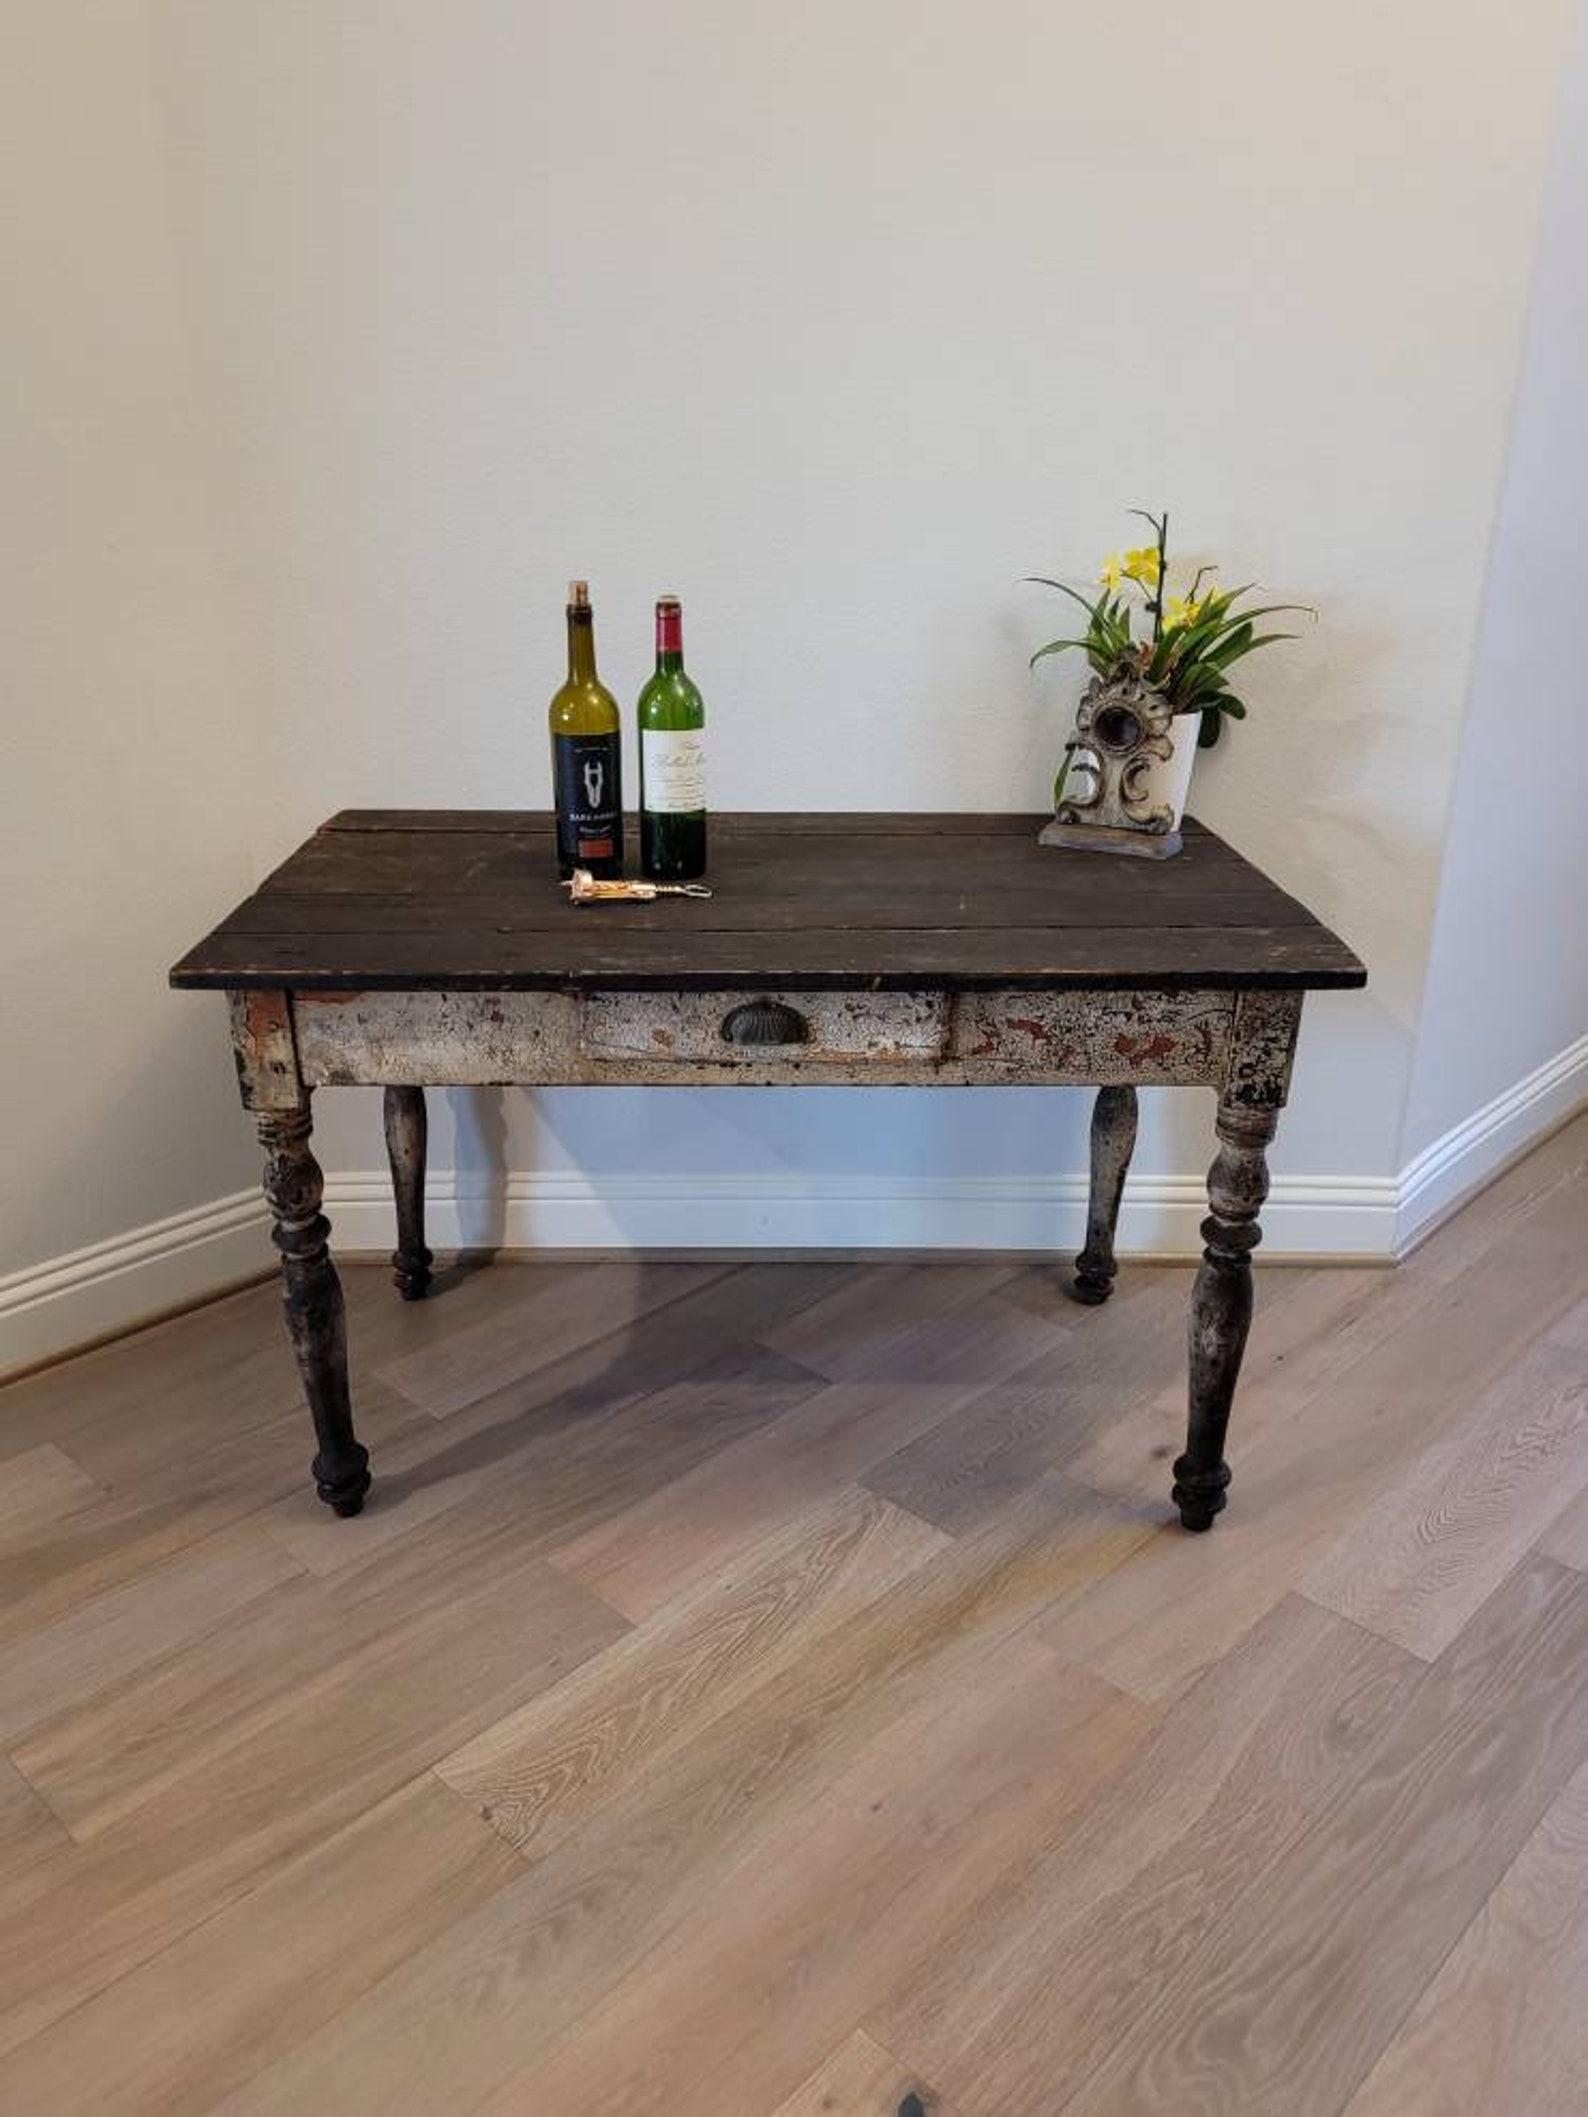 Patina Perfection!! A rustic French farmhouse work table from the 19th century. 

Featuring hand-crafted pegged solid wood construction, featuring an overhanging rectangular ebonized five plank boarded top, over a simple apron with single drawer,